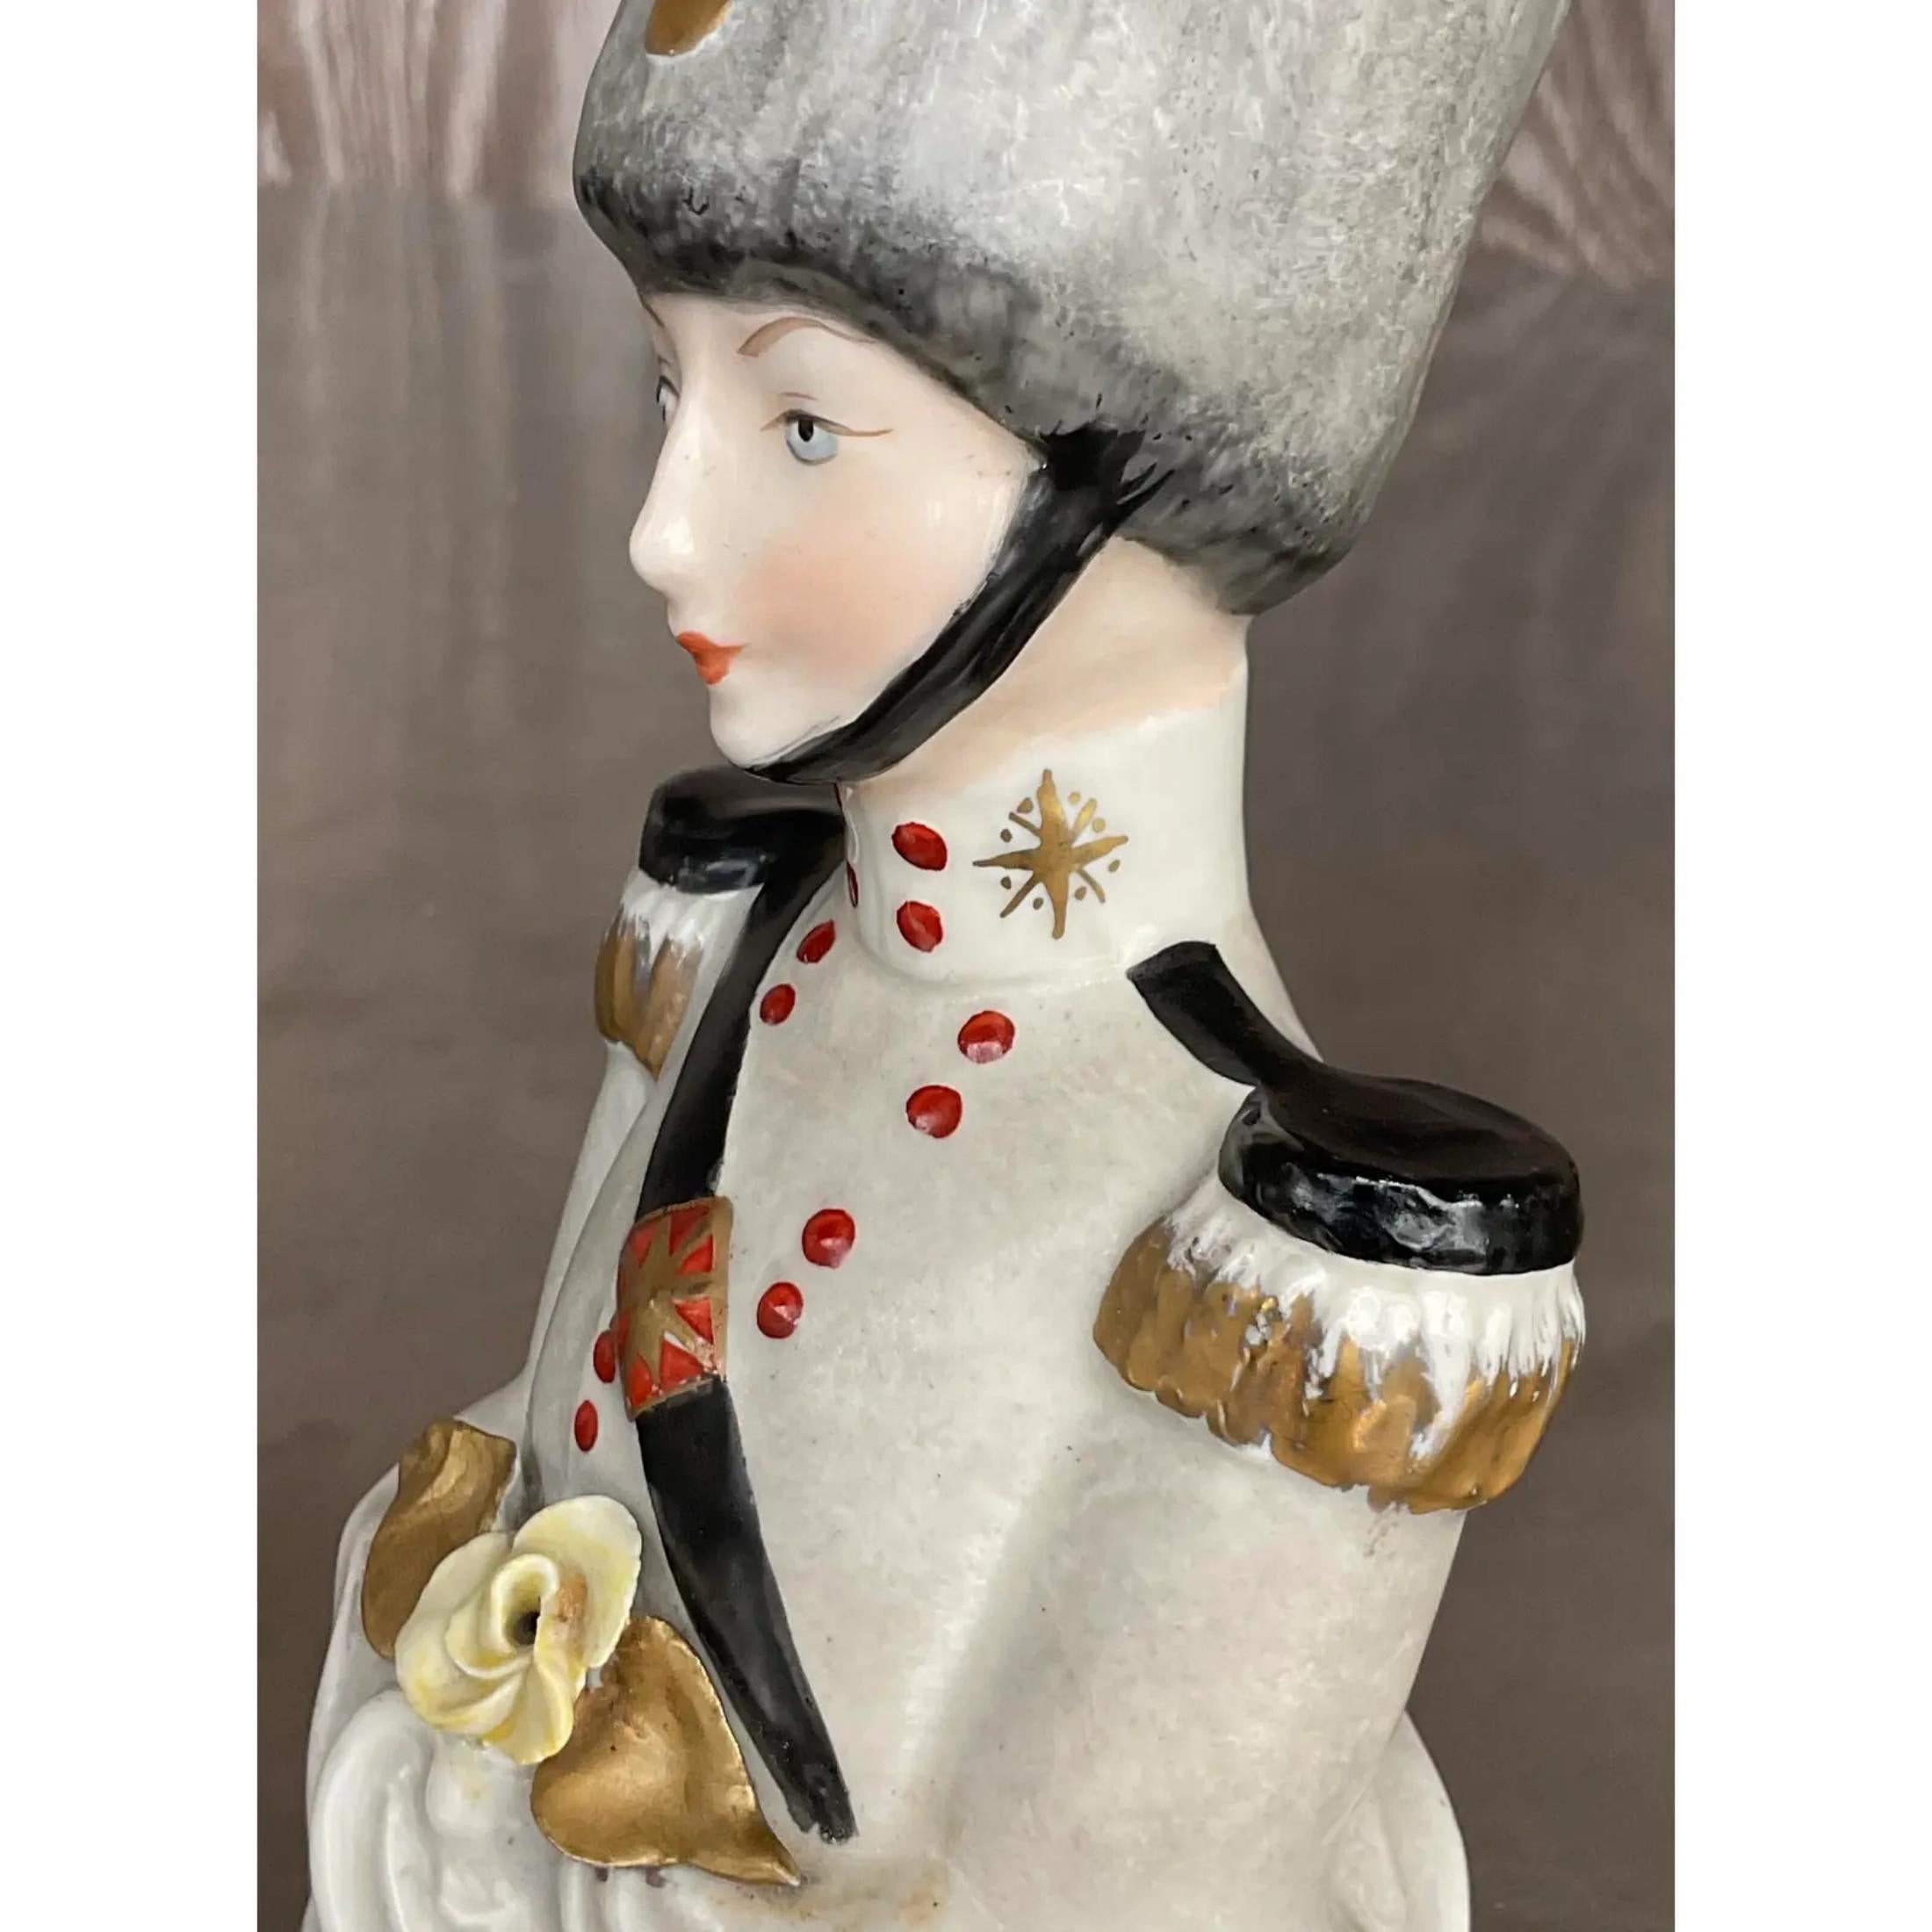 A fabulous vintage Boho Porcelain solider. A chic hand painted figure with a beautiful attention to detail. Acquired from a Palm Beach estate.